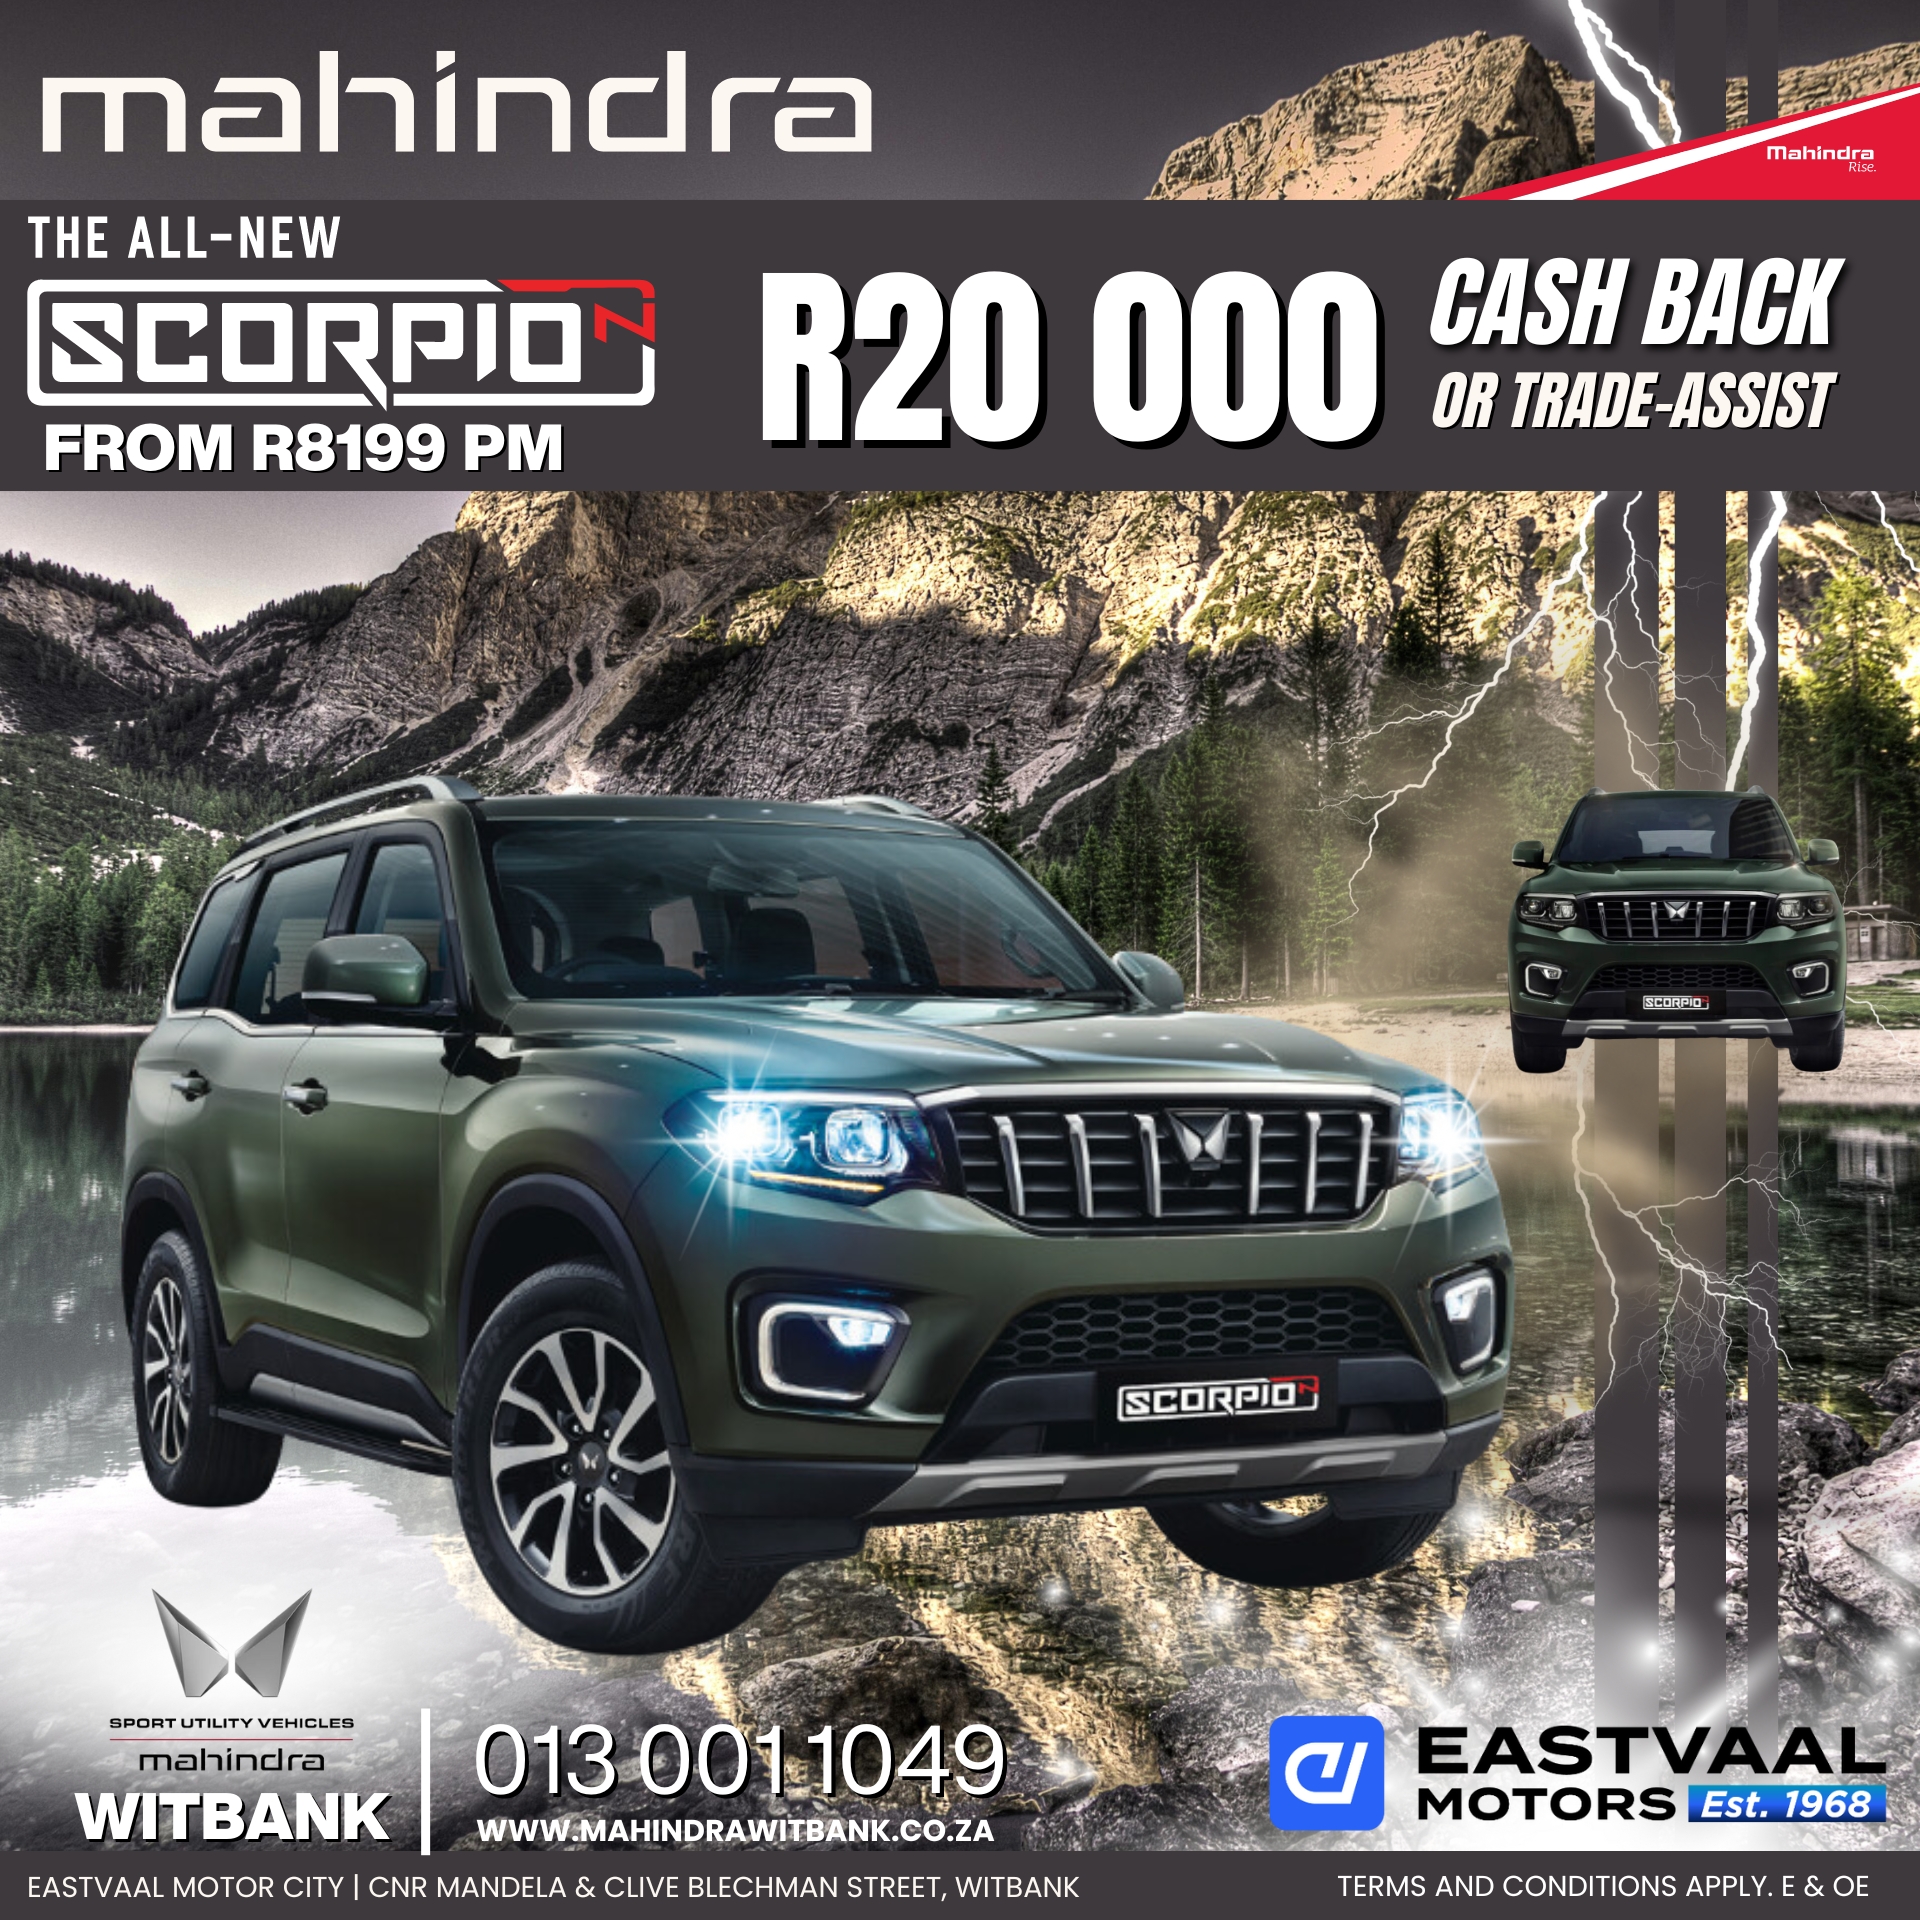 This July, experience power and performance with Mahindra at Eastvaal Motor City. Get yours today! image from 